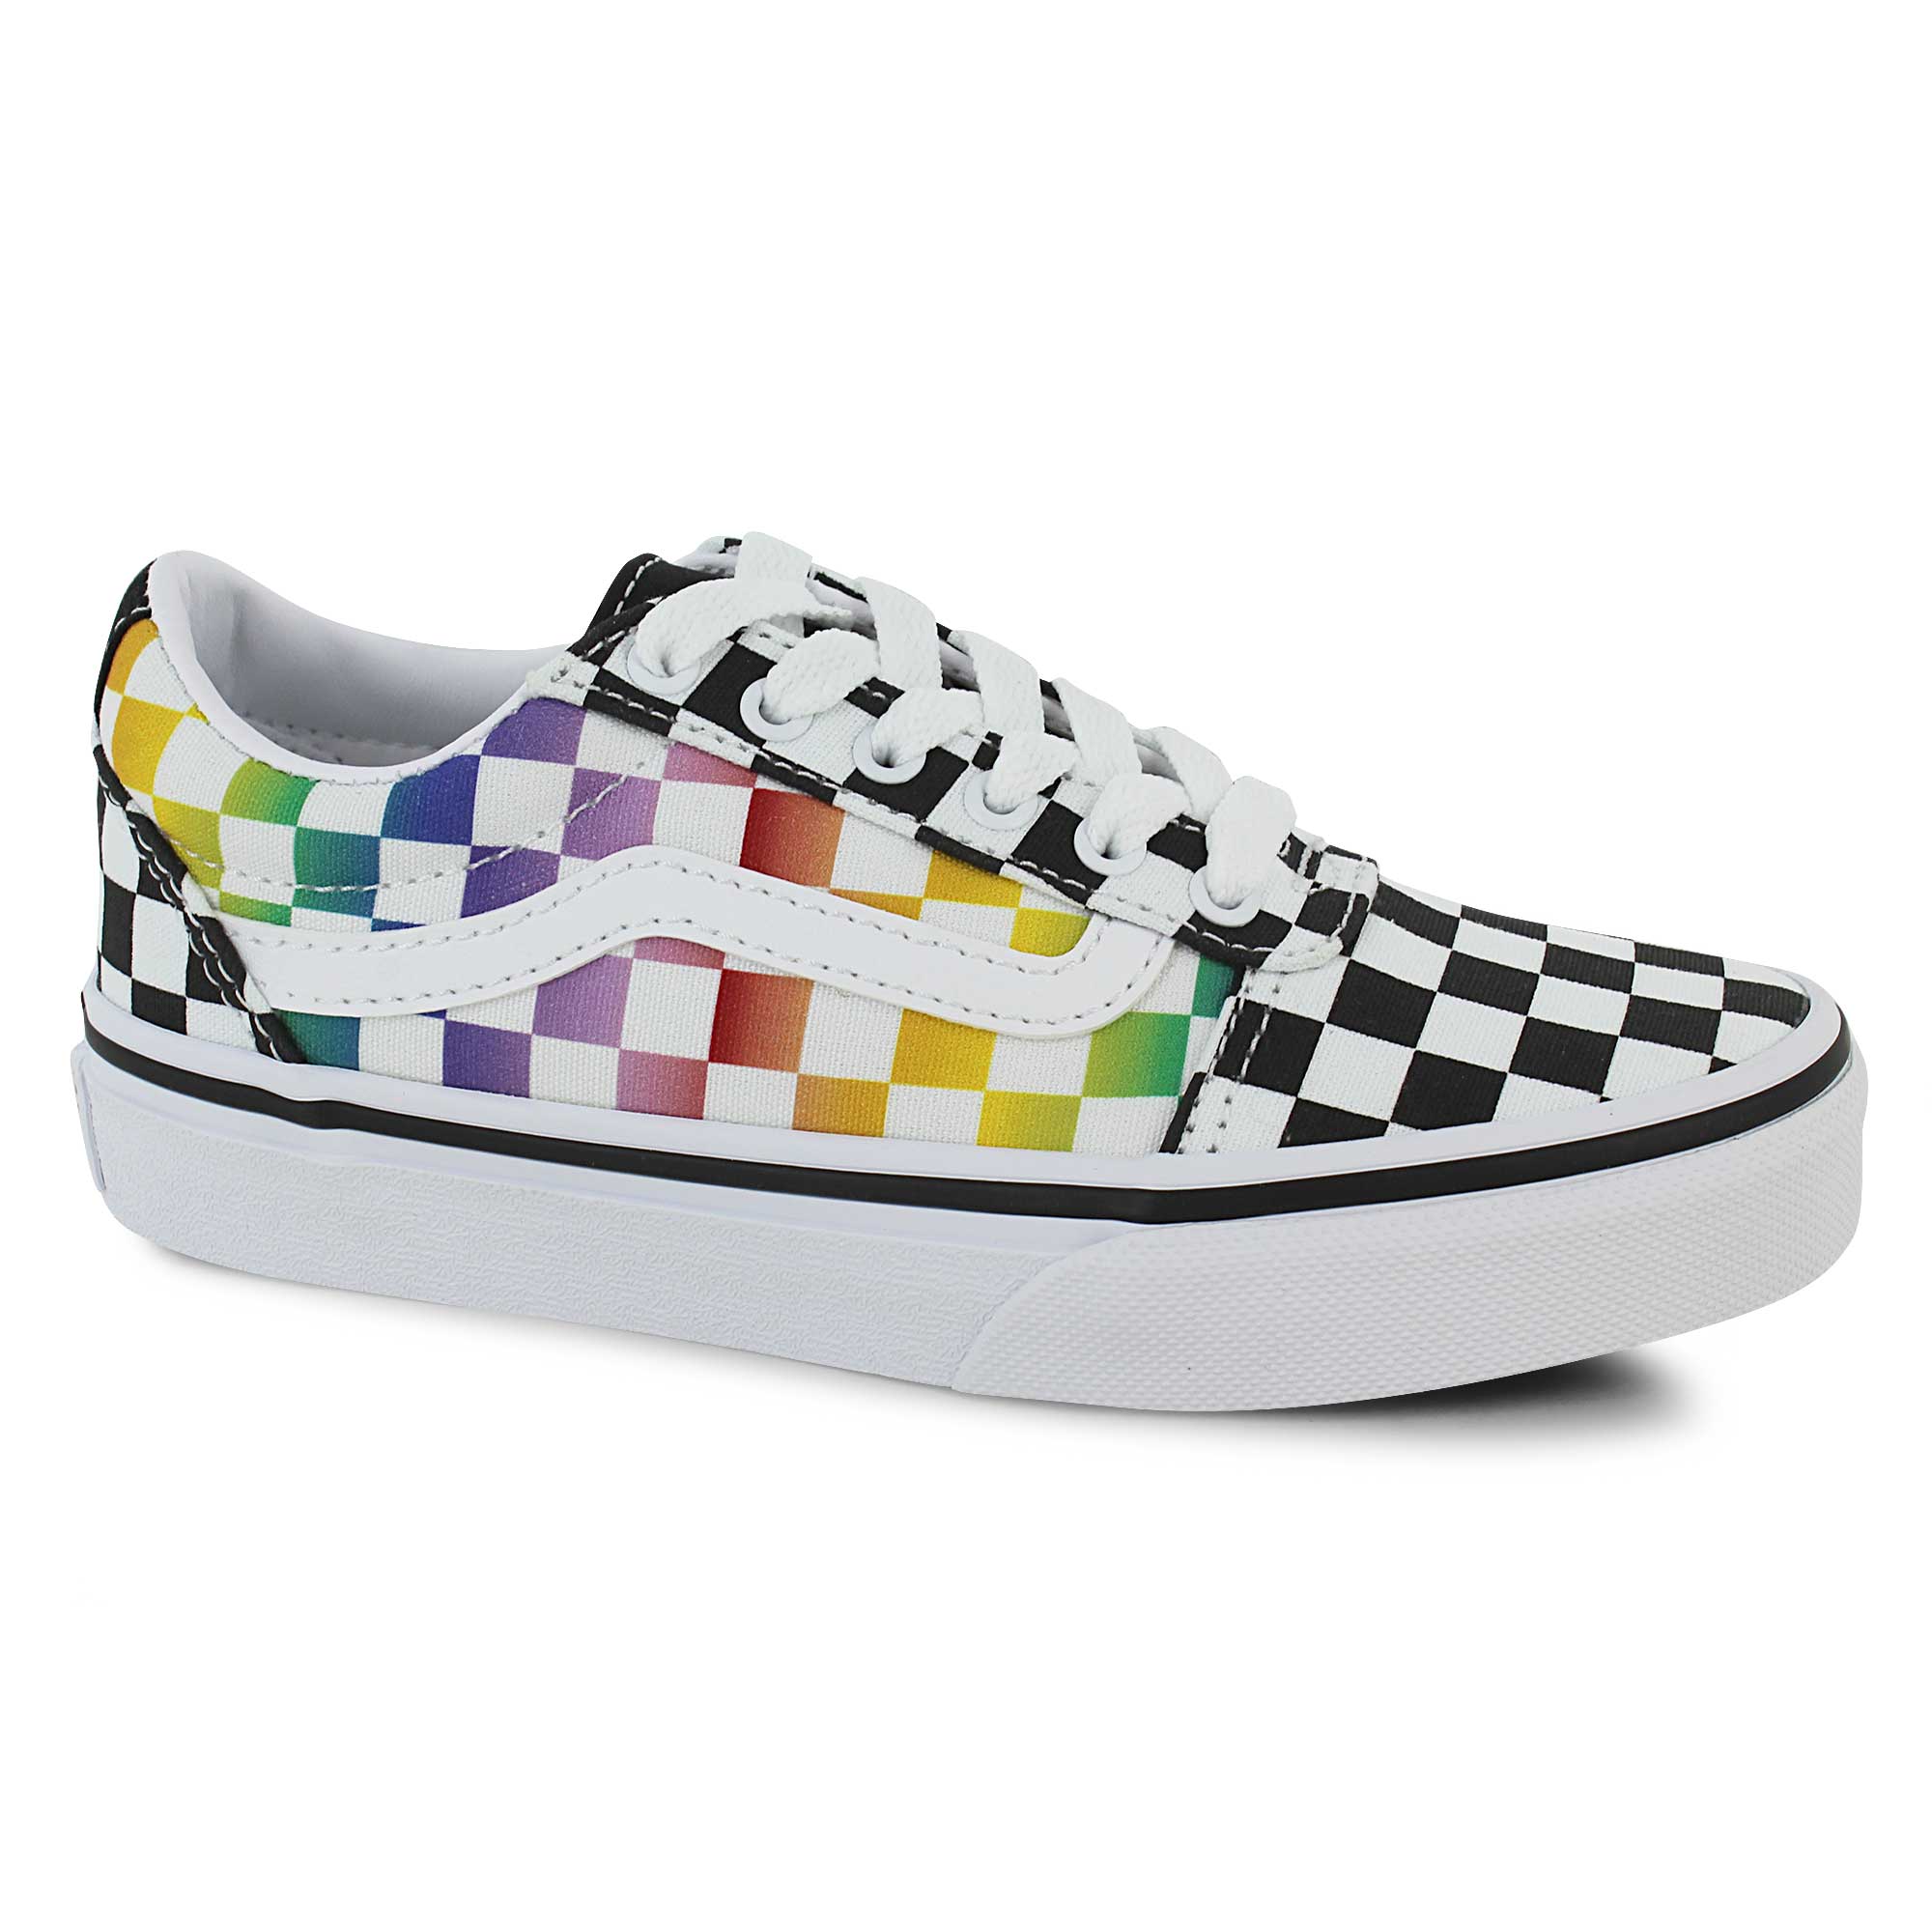 rainbow checkerboard shoes